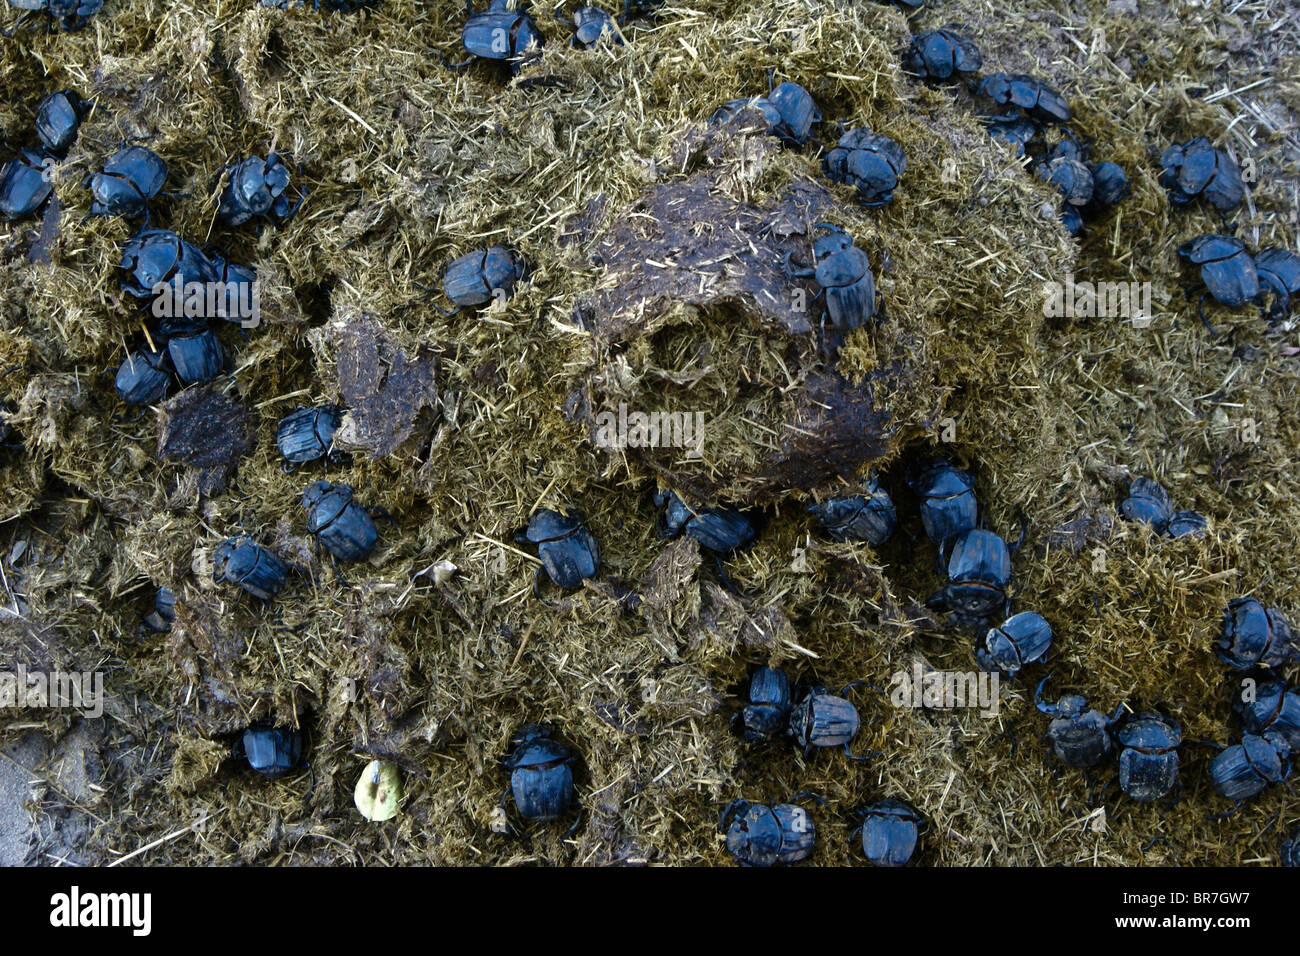 Dung beetles in elephant dung, Tembe National Elephant Park, Kwazulu-Natal, South Africa Stock Photo